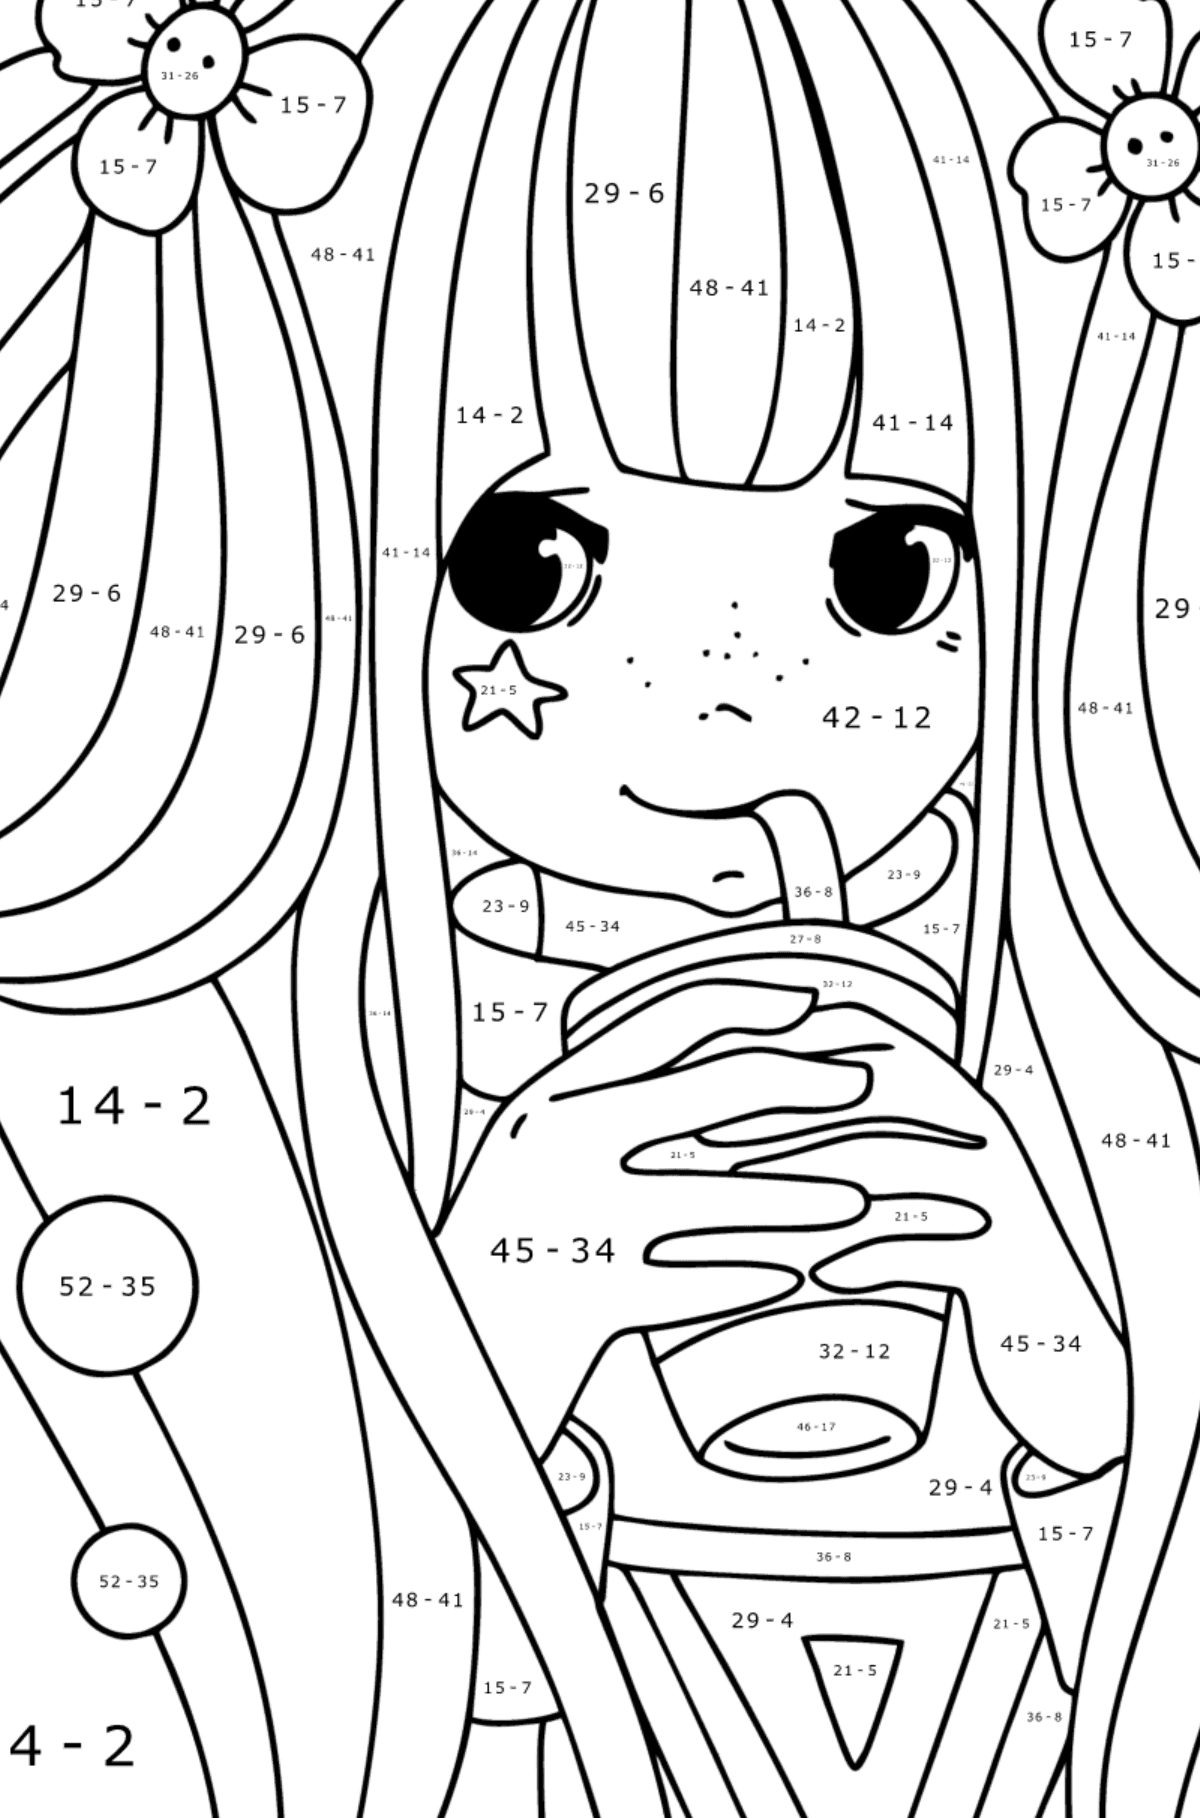 Girl anime fashionista coloring page - Math Coloring - Subtraction for Kids